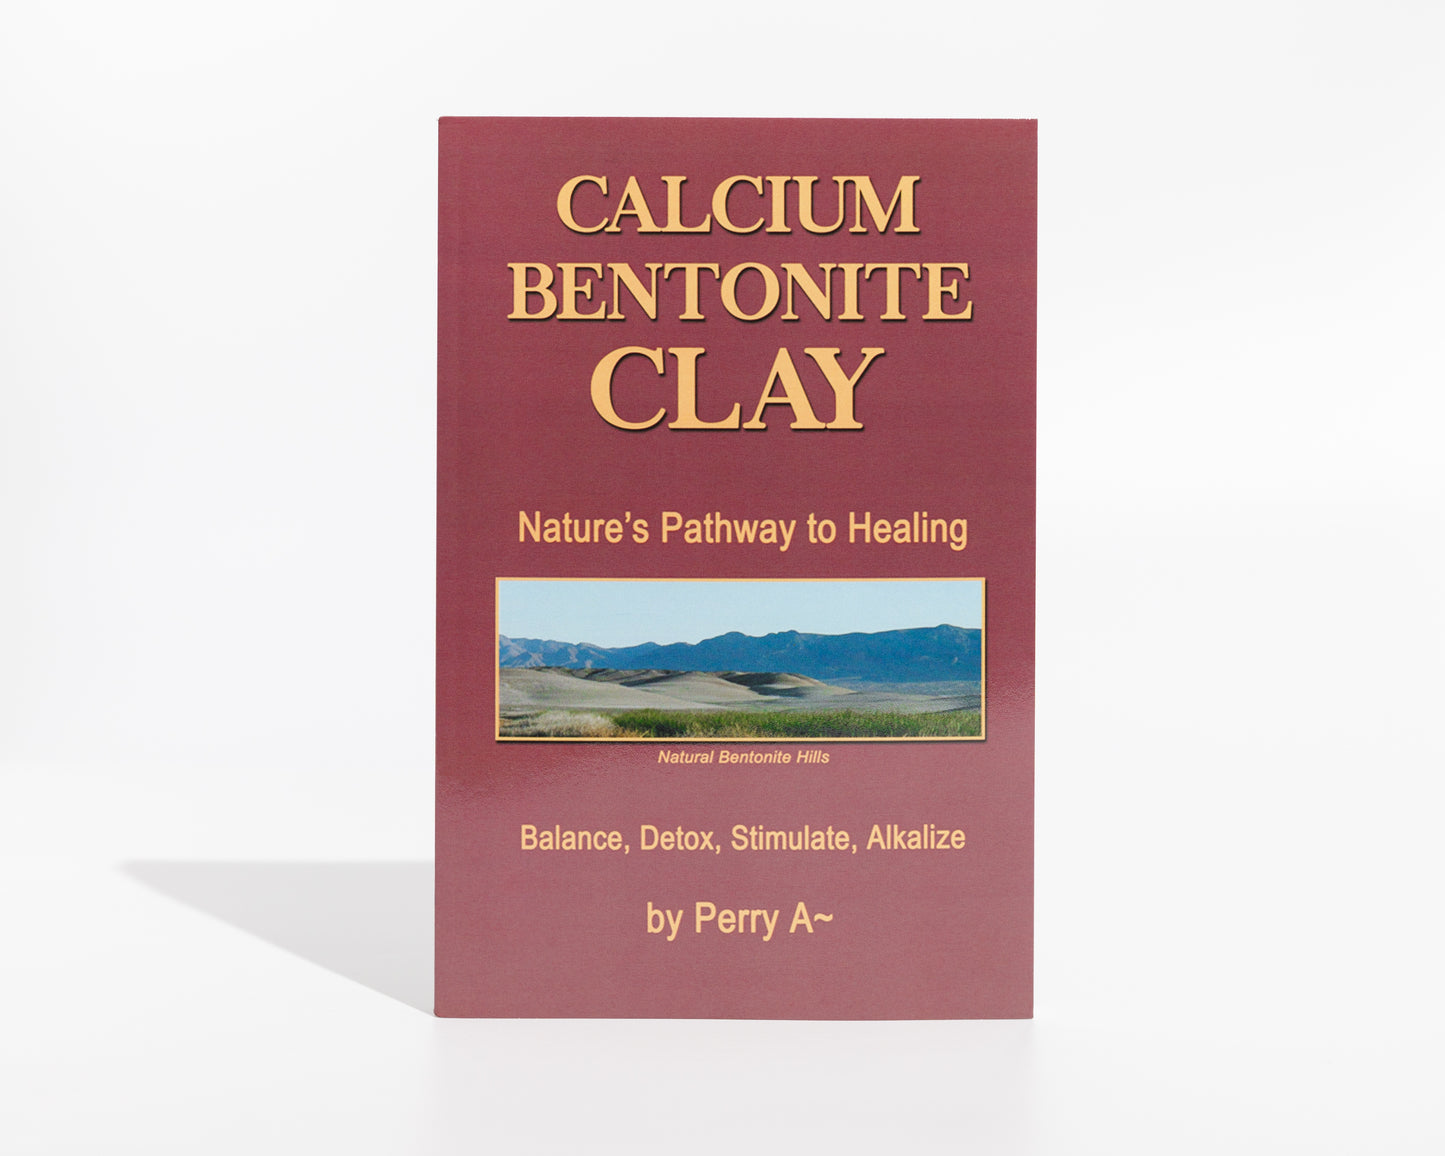 Calcium Bentonite Clay Nature's Pathway to Healing. Author Perry A~